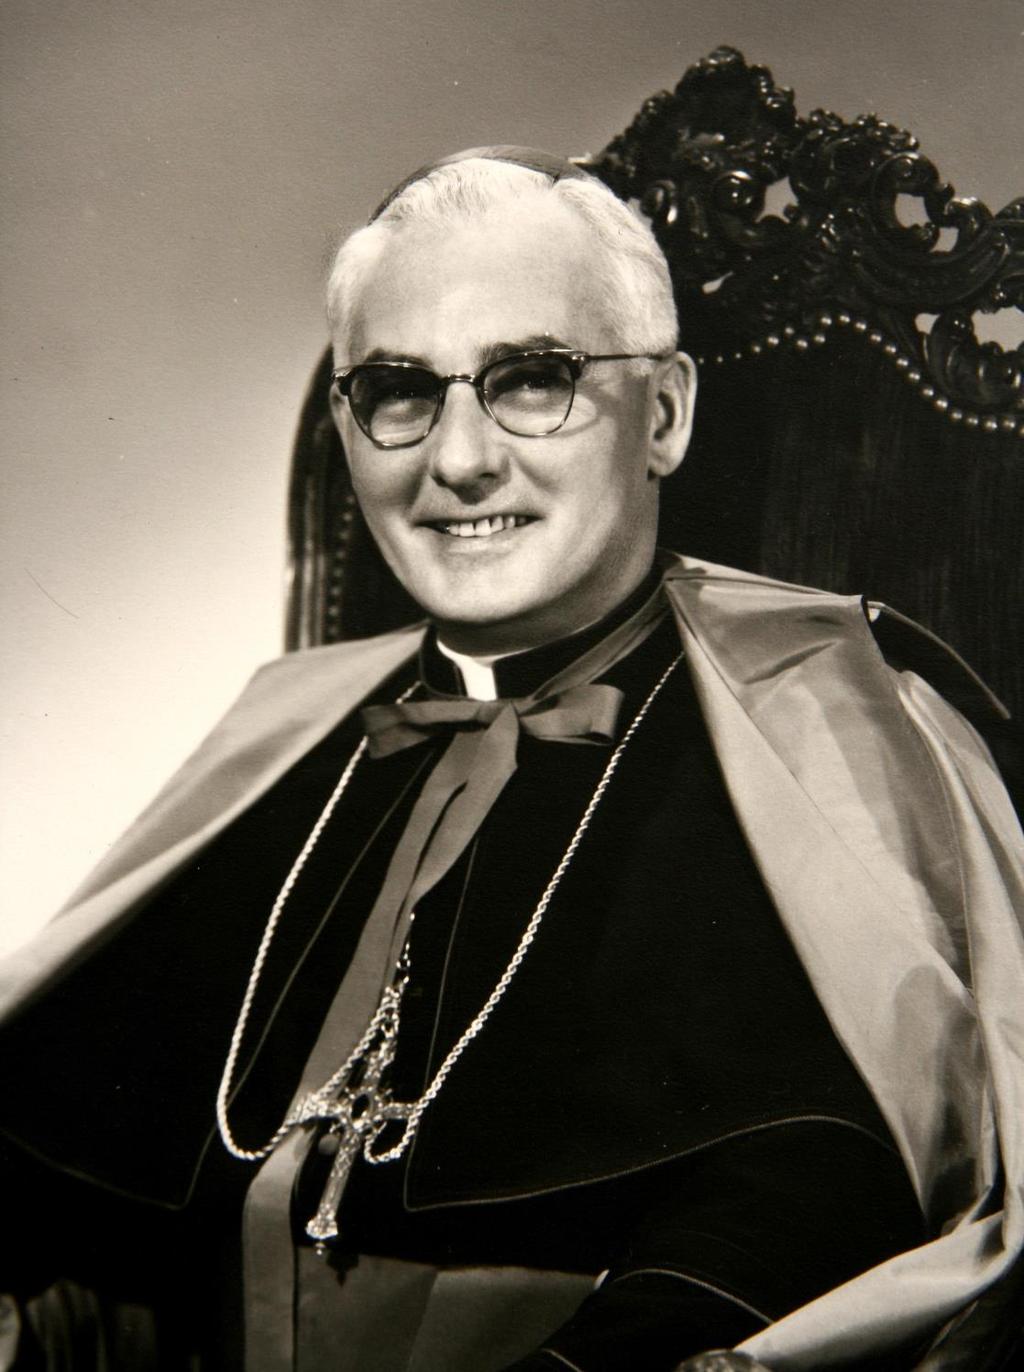 + BISHOP ALDEN JOHN BELL Priest of the Archdiocese of Los Angeles 1932-1956 Auxiliary Bishop of